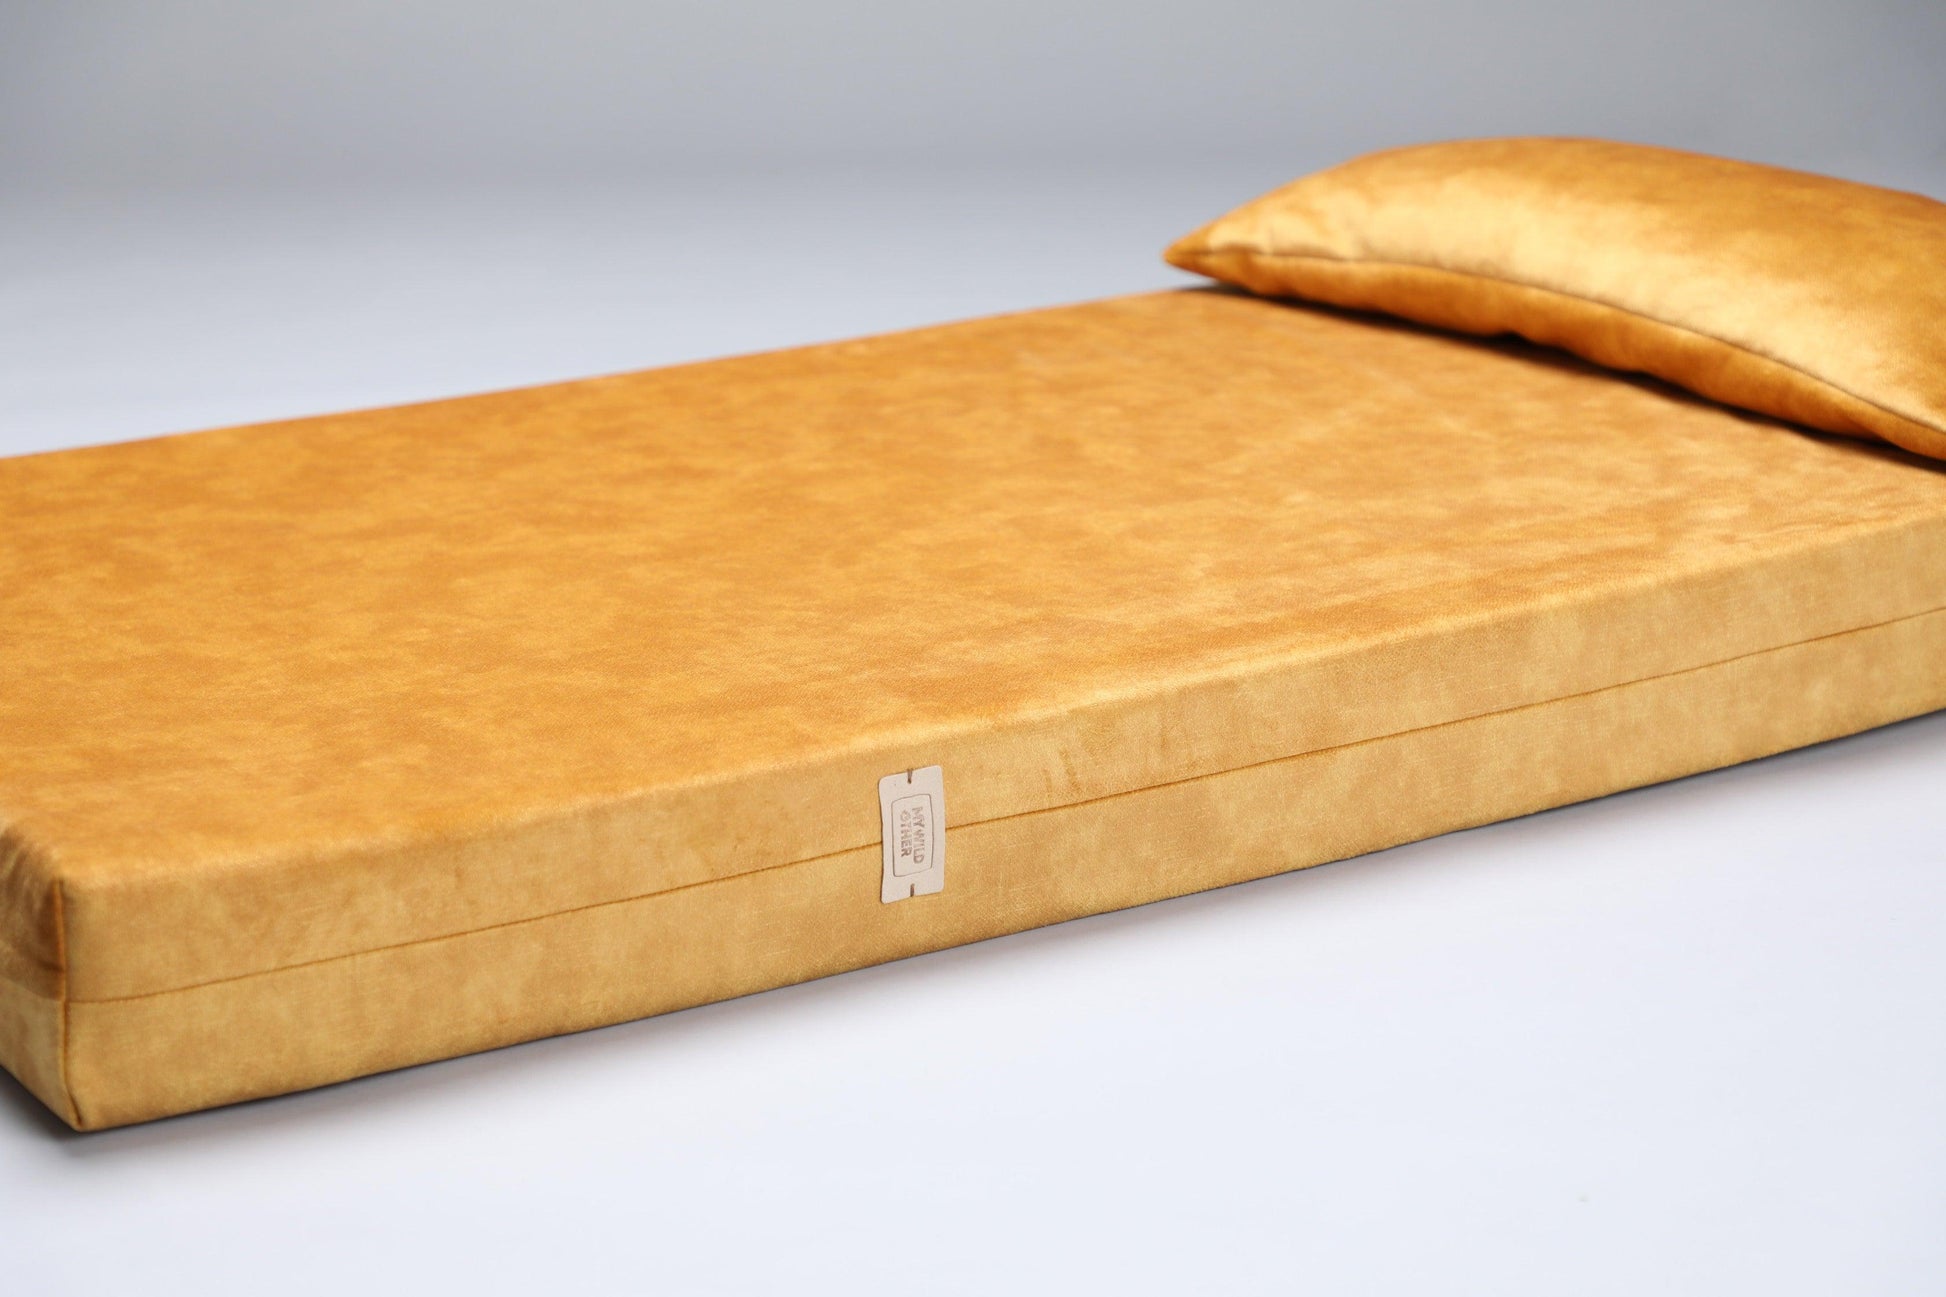 Dog bed for large dogs | Extra comfort & support | 2-sided | AMBER YELLOW - premium dog goods handmade in Europe by animalistus